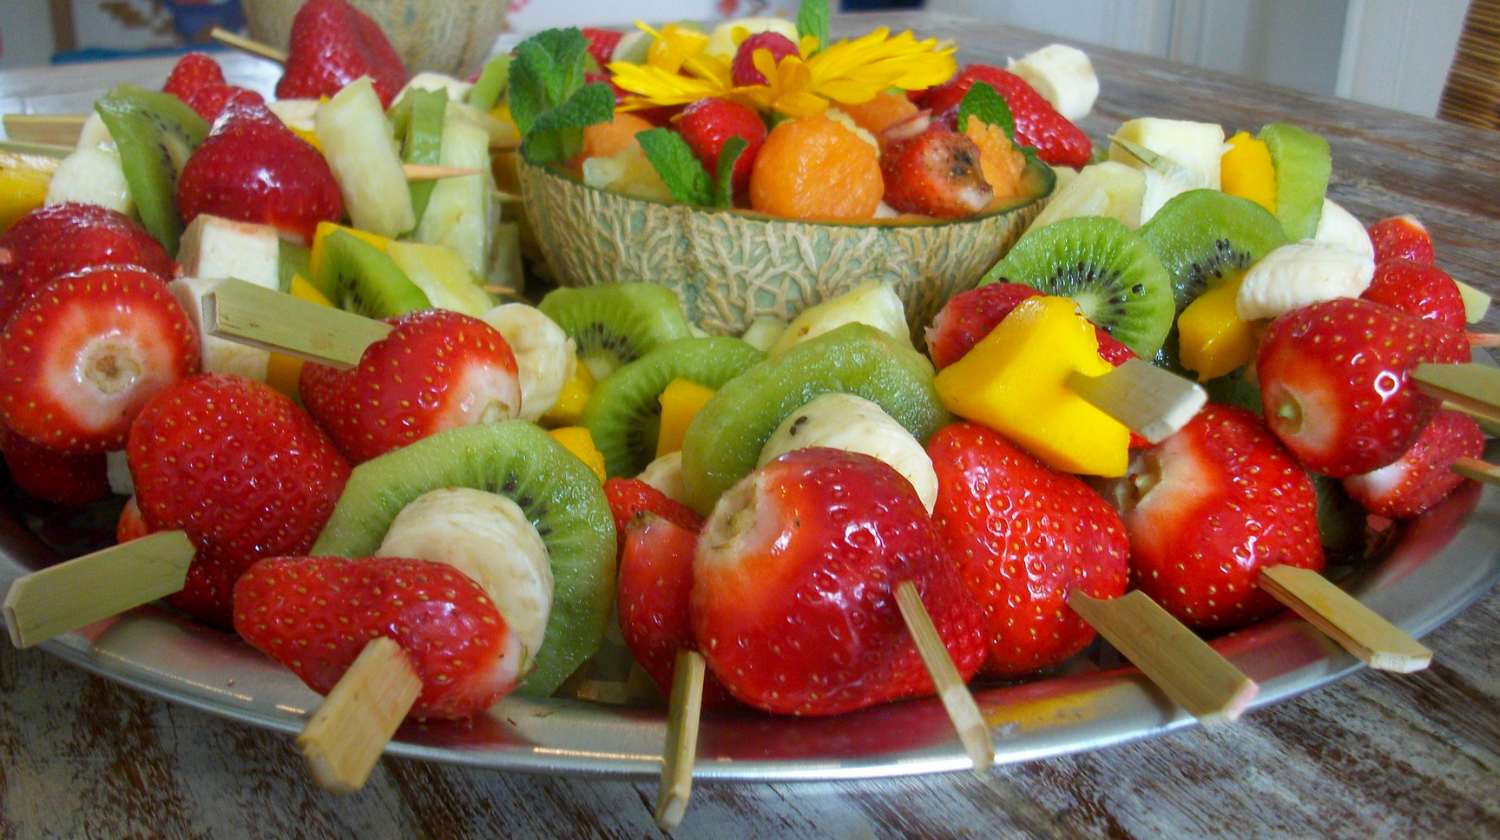 17-christmas-party-food-ideas-easy-to-prepare-finger-foods